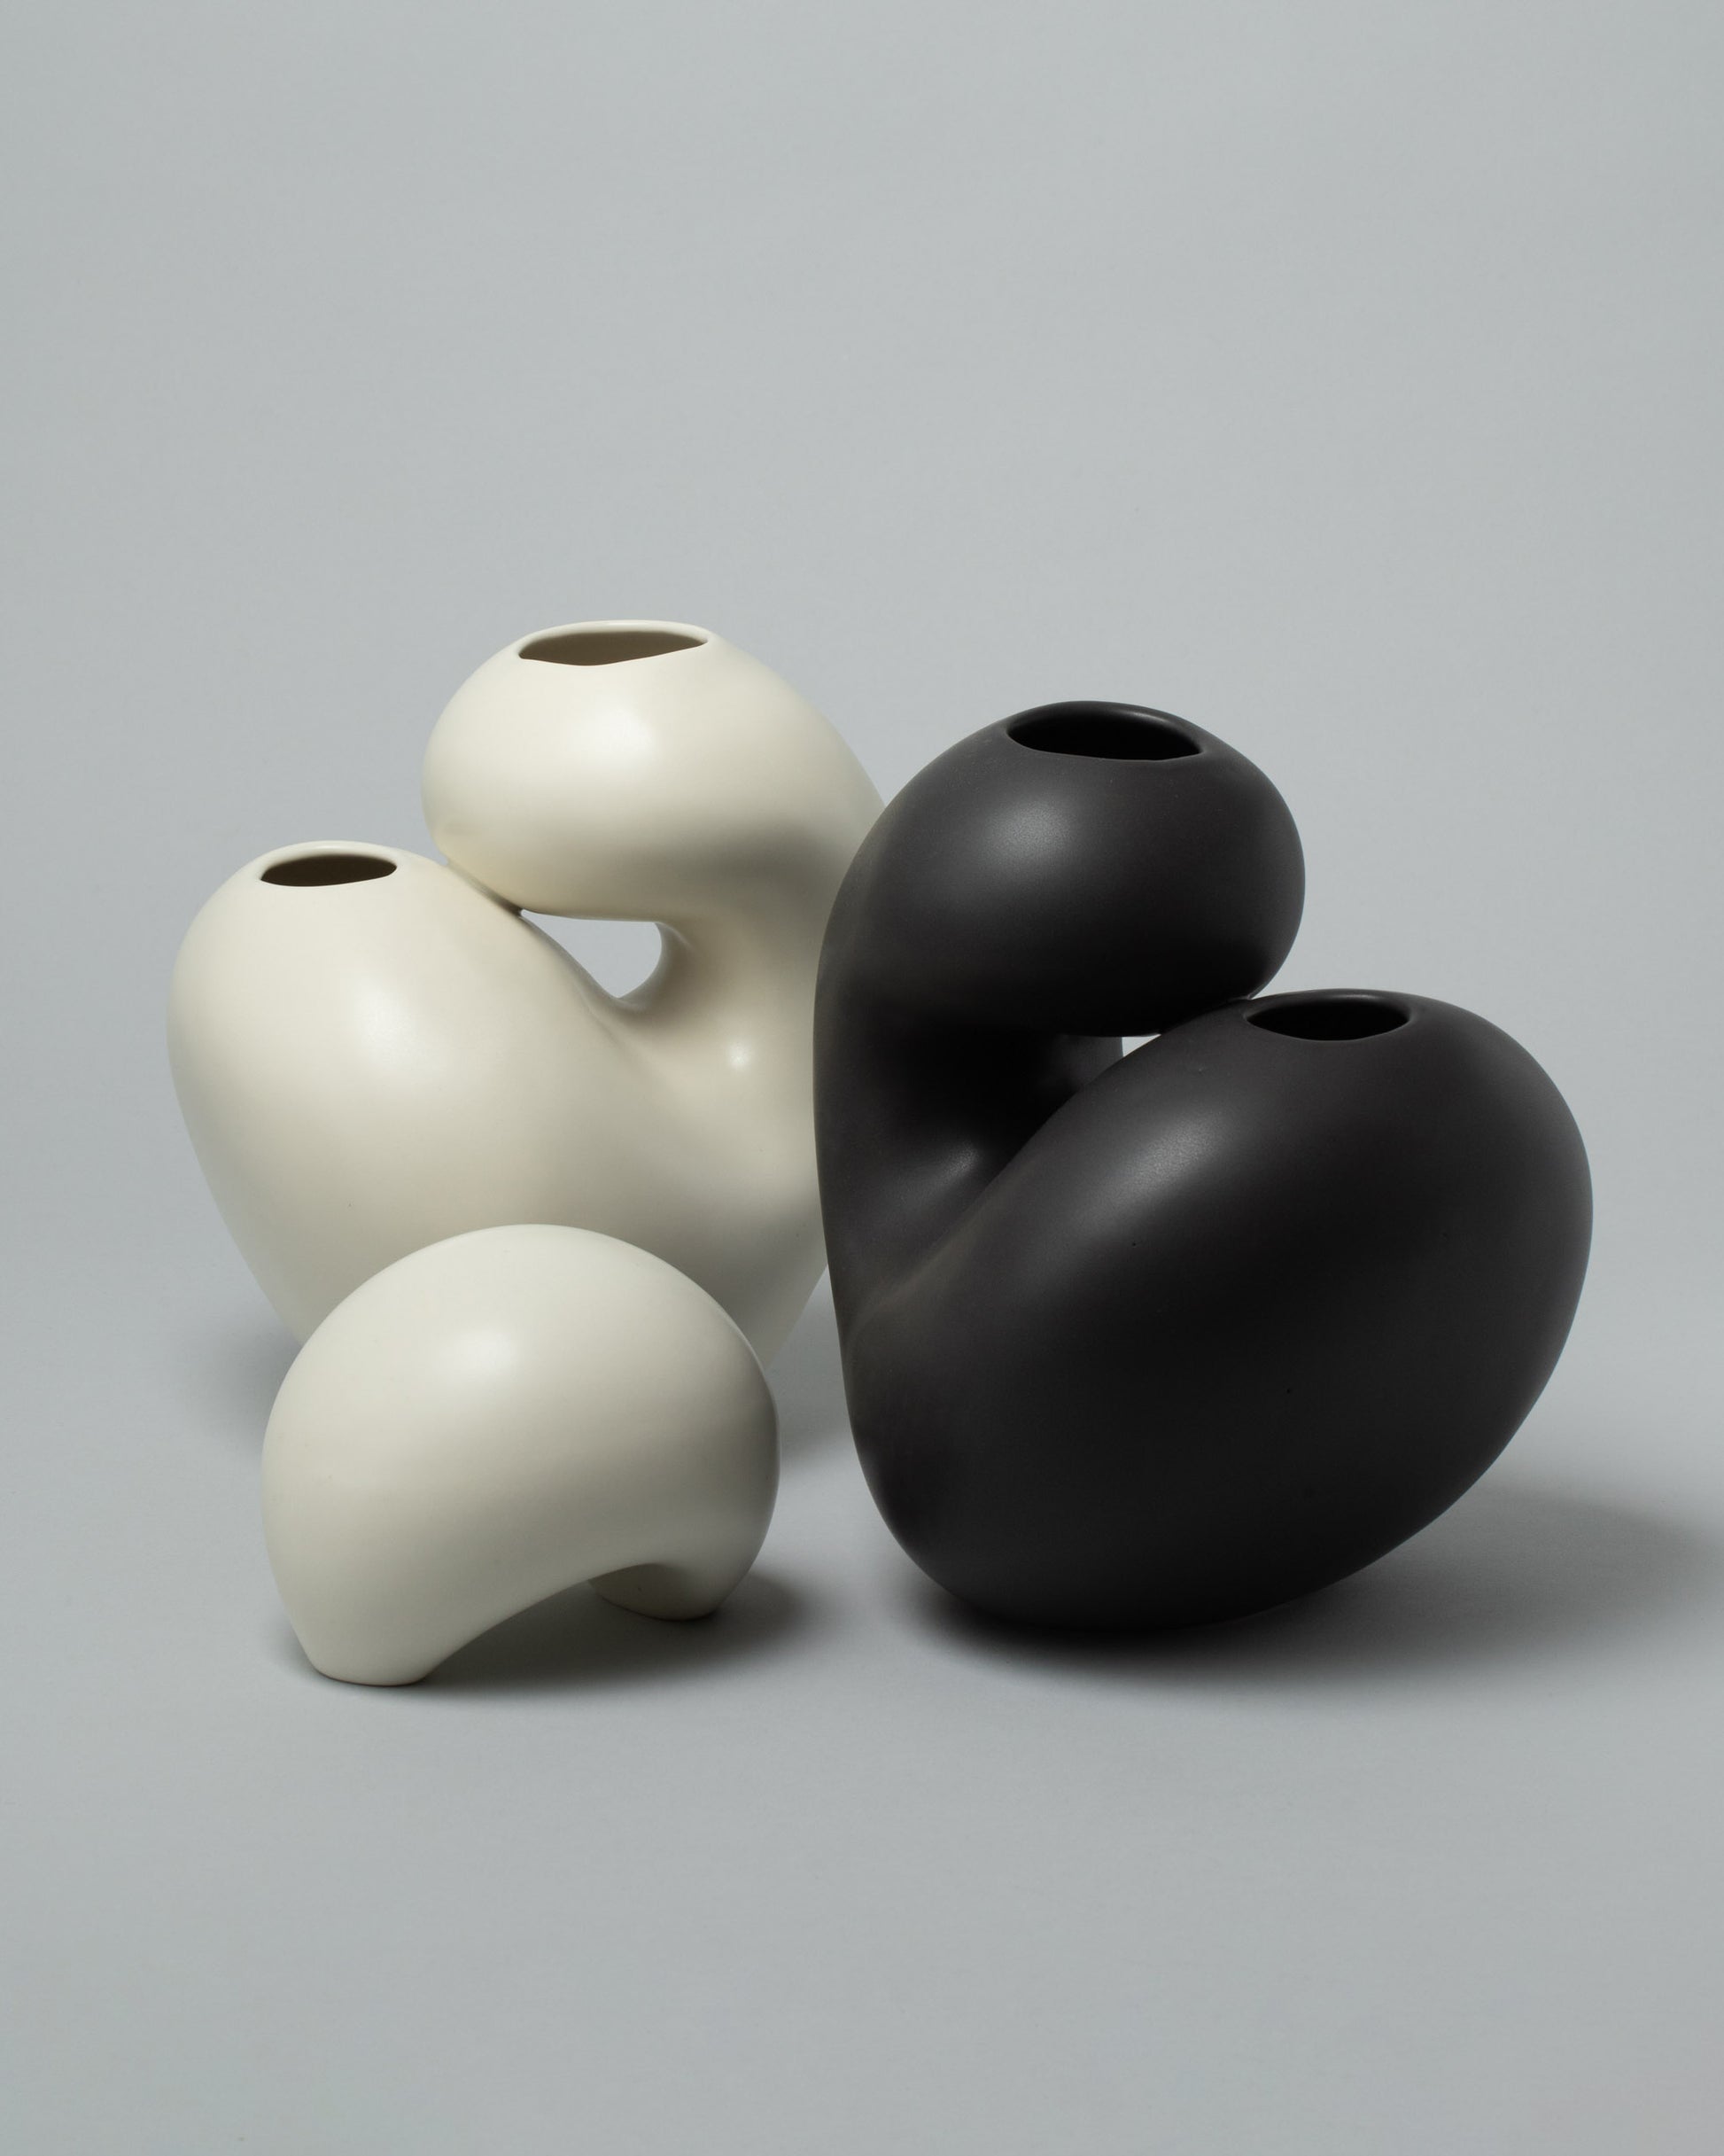 Group photo of Dust and Form Being Form, Ivory Vita Vessel, and Charcoal Vita Vessel on light colored background.